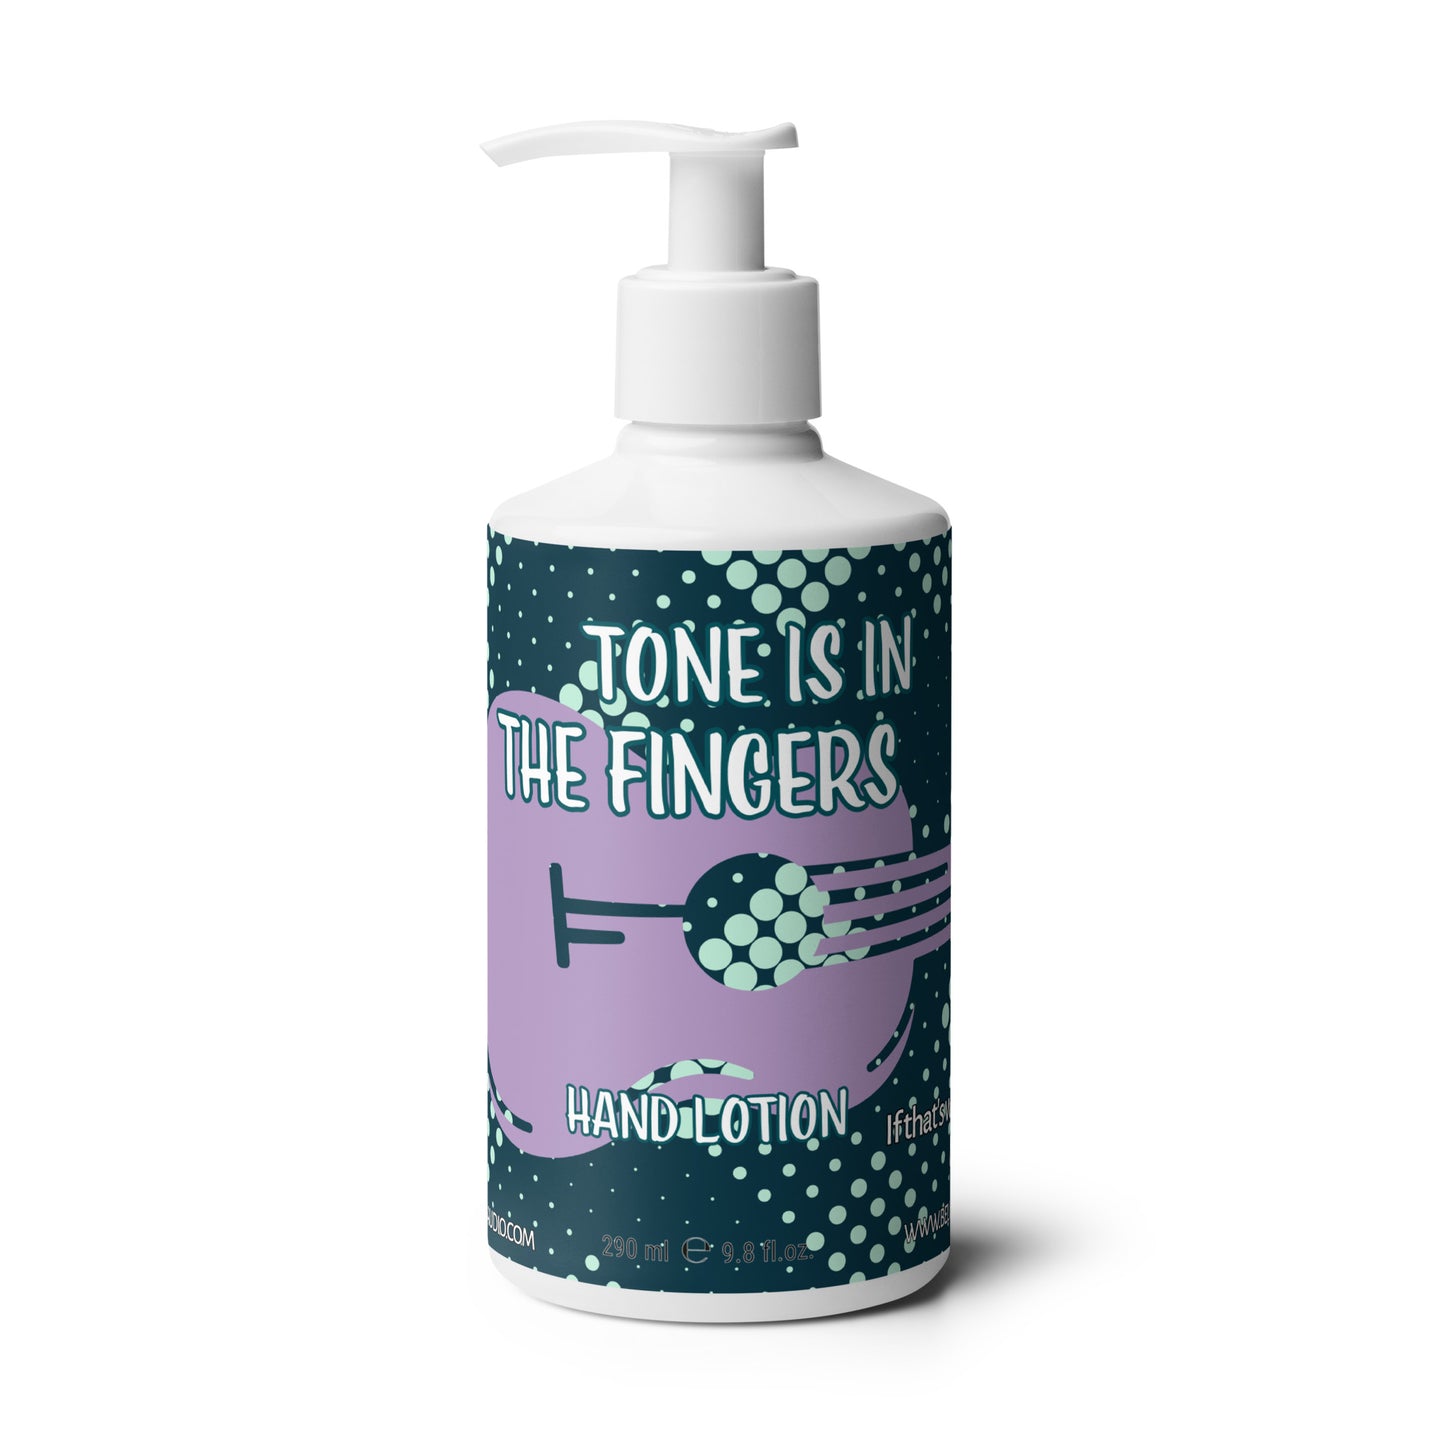 "Tone Is In The Fingers" refreshing hand & body lotion